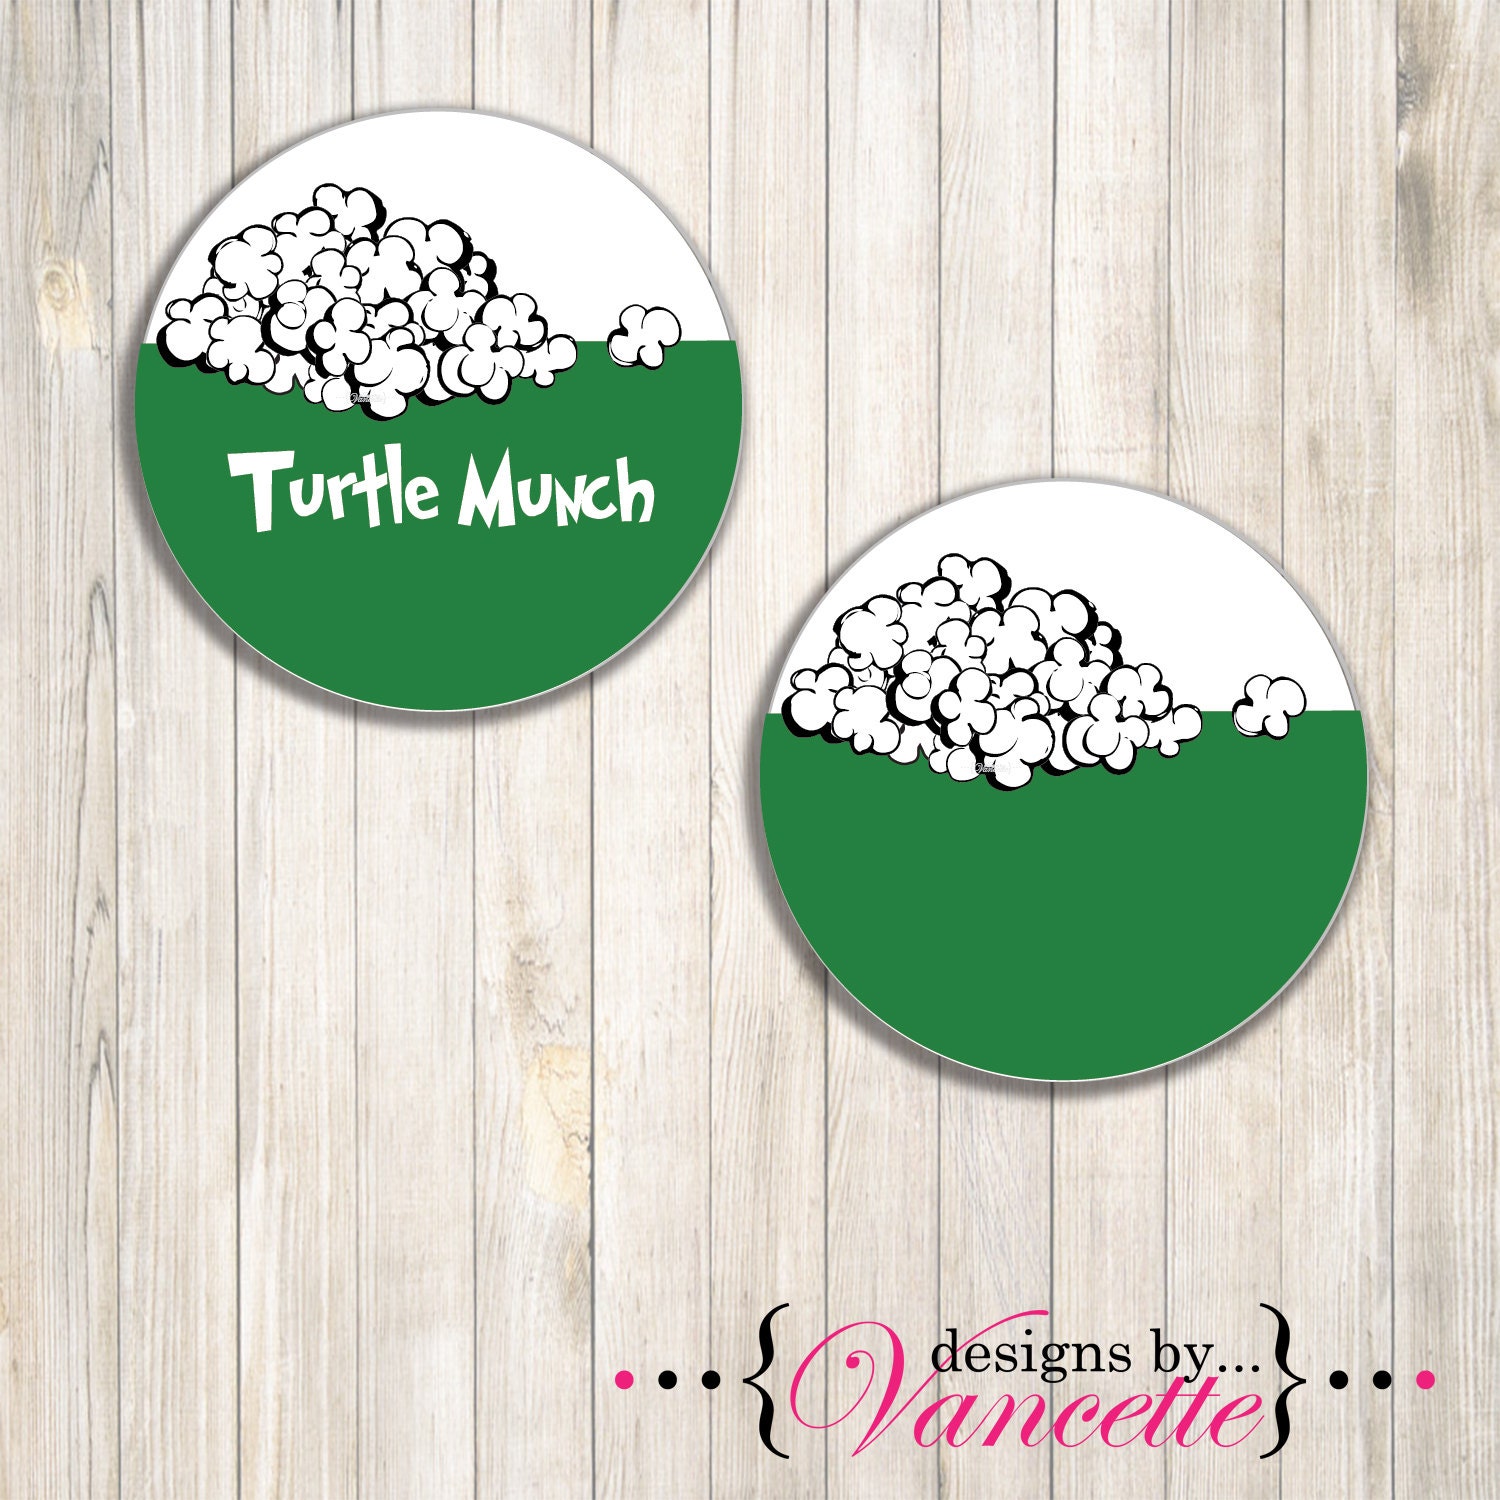 hop-on-popcorn-popcorn-labels-with-custom-text